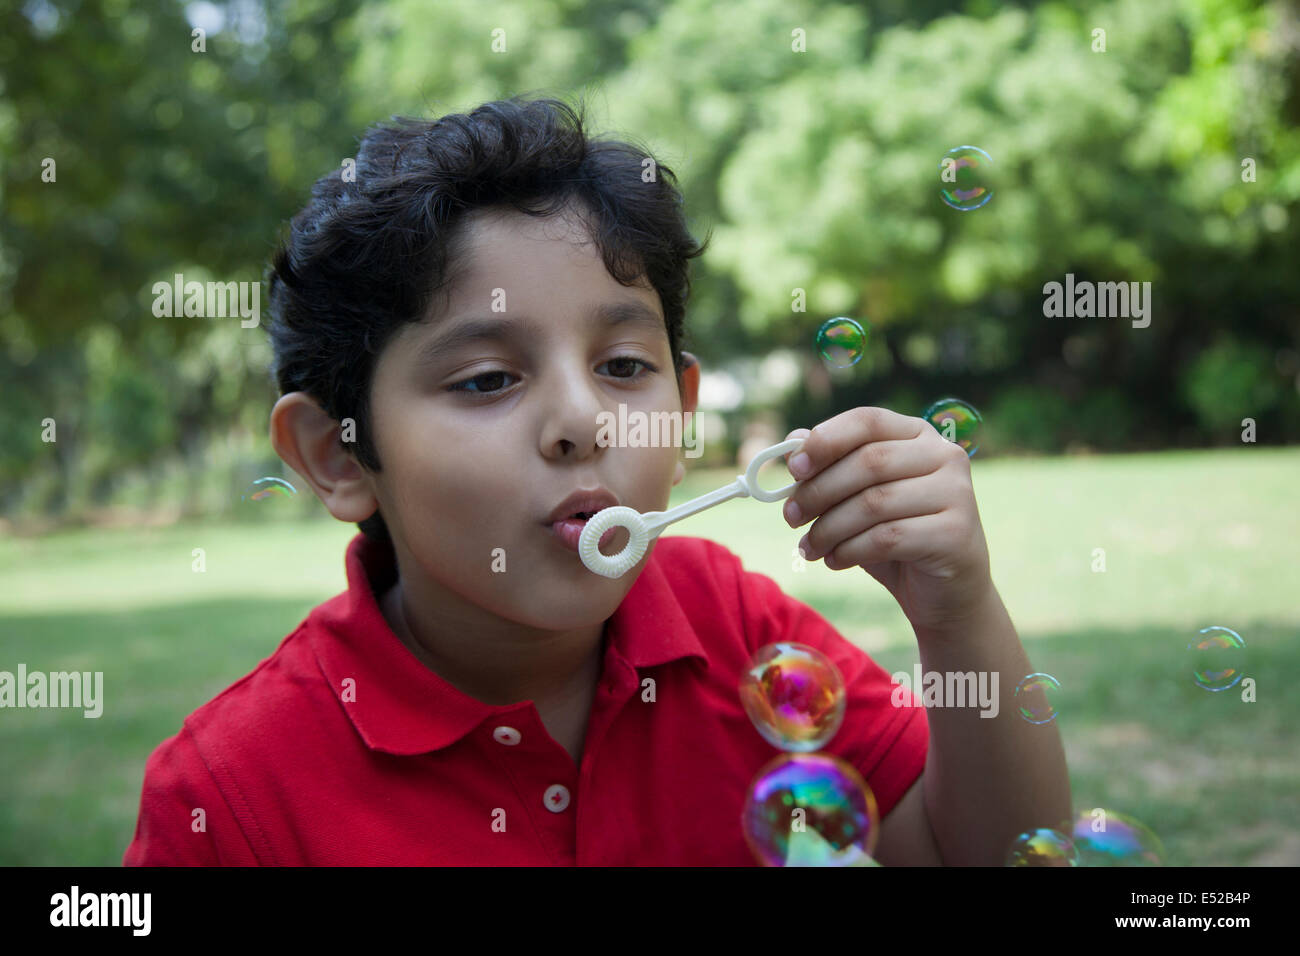 Young boy blowing bubbles Stock Photo